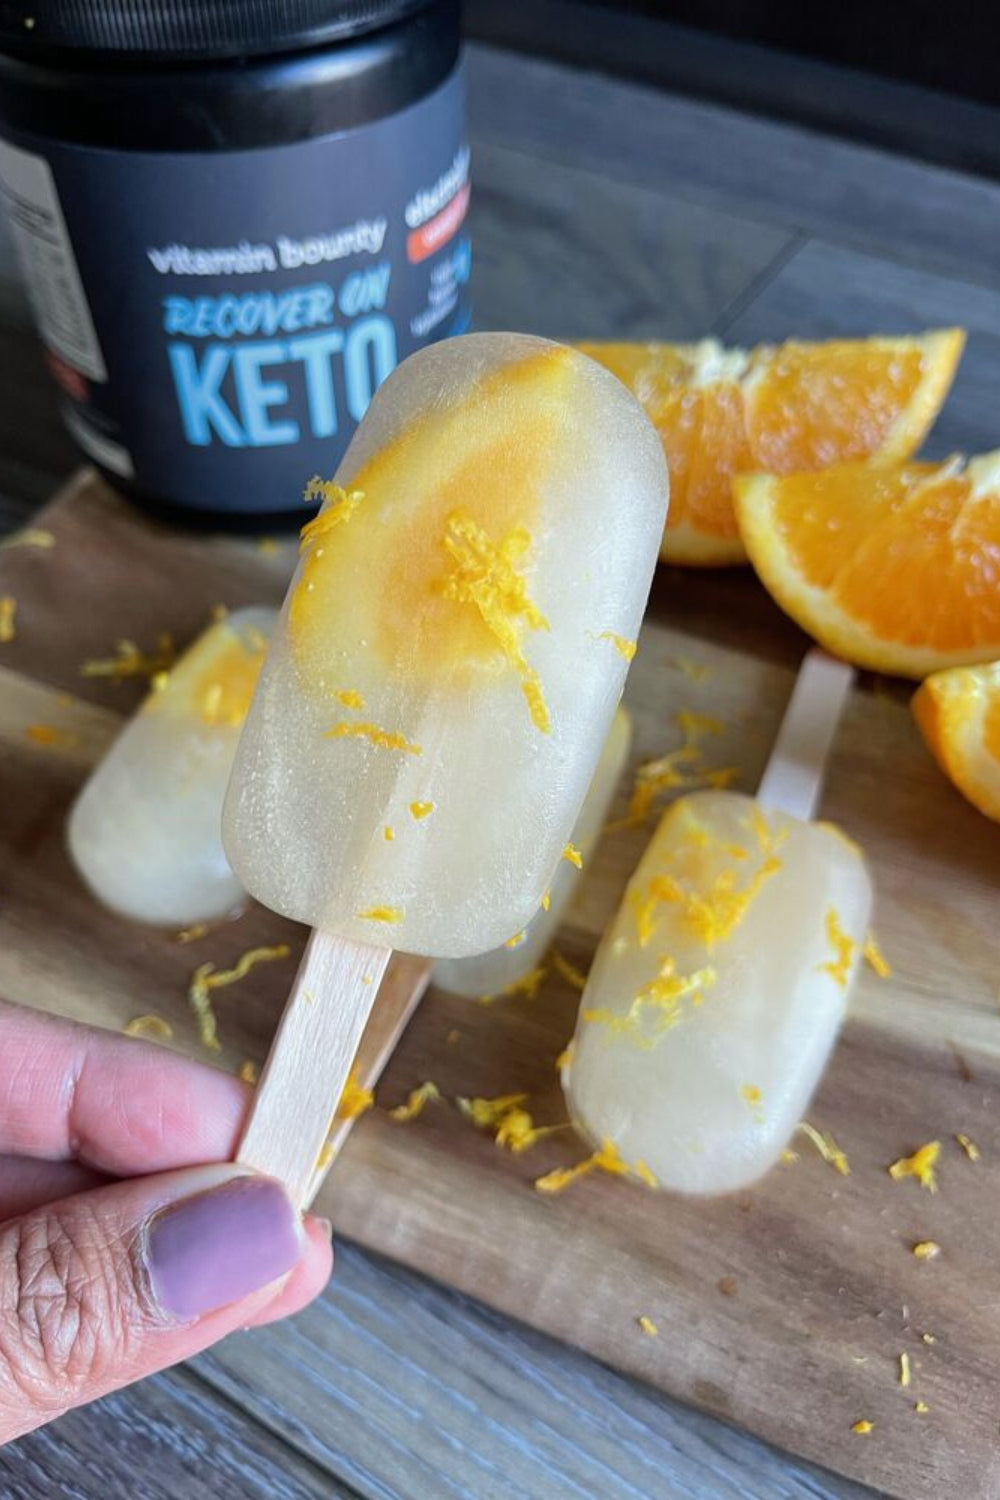 Recover on Keto Electrolyte Popsicles pictured with orange slices 